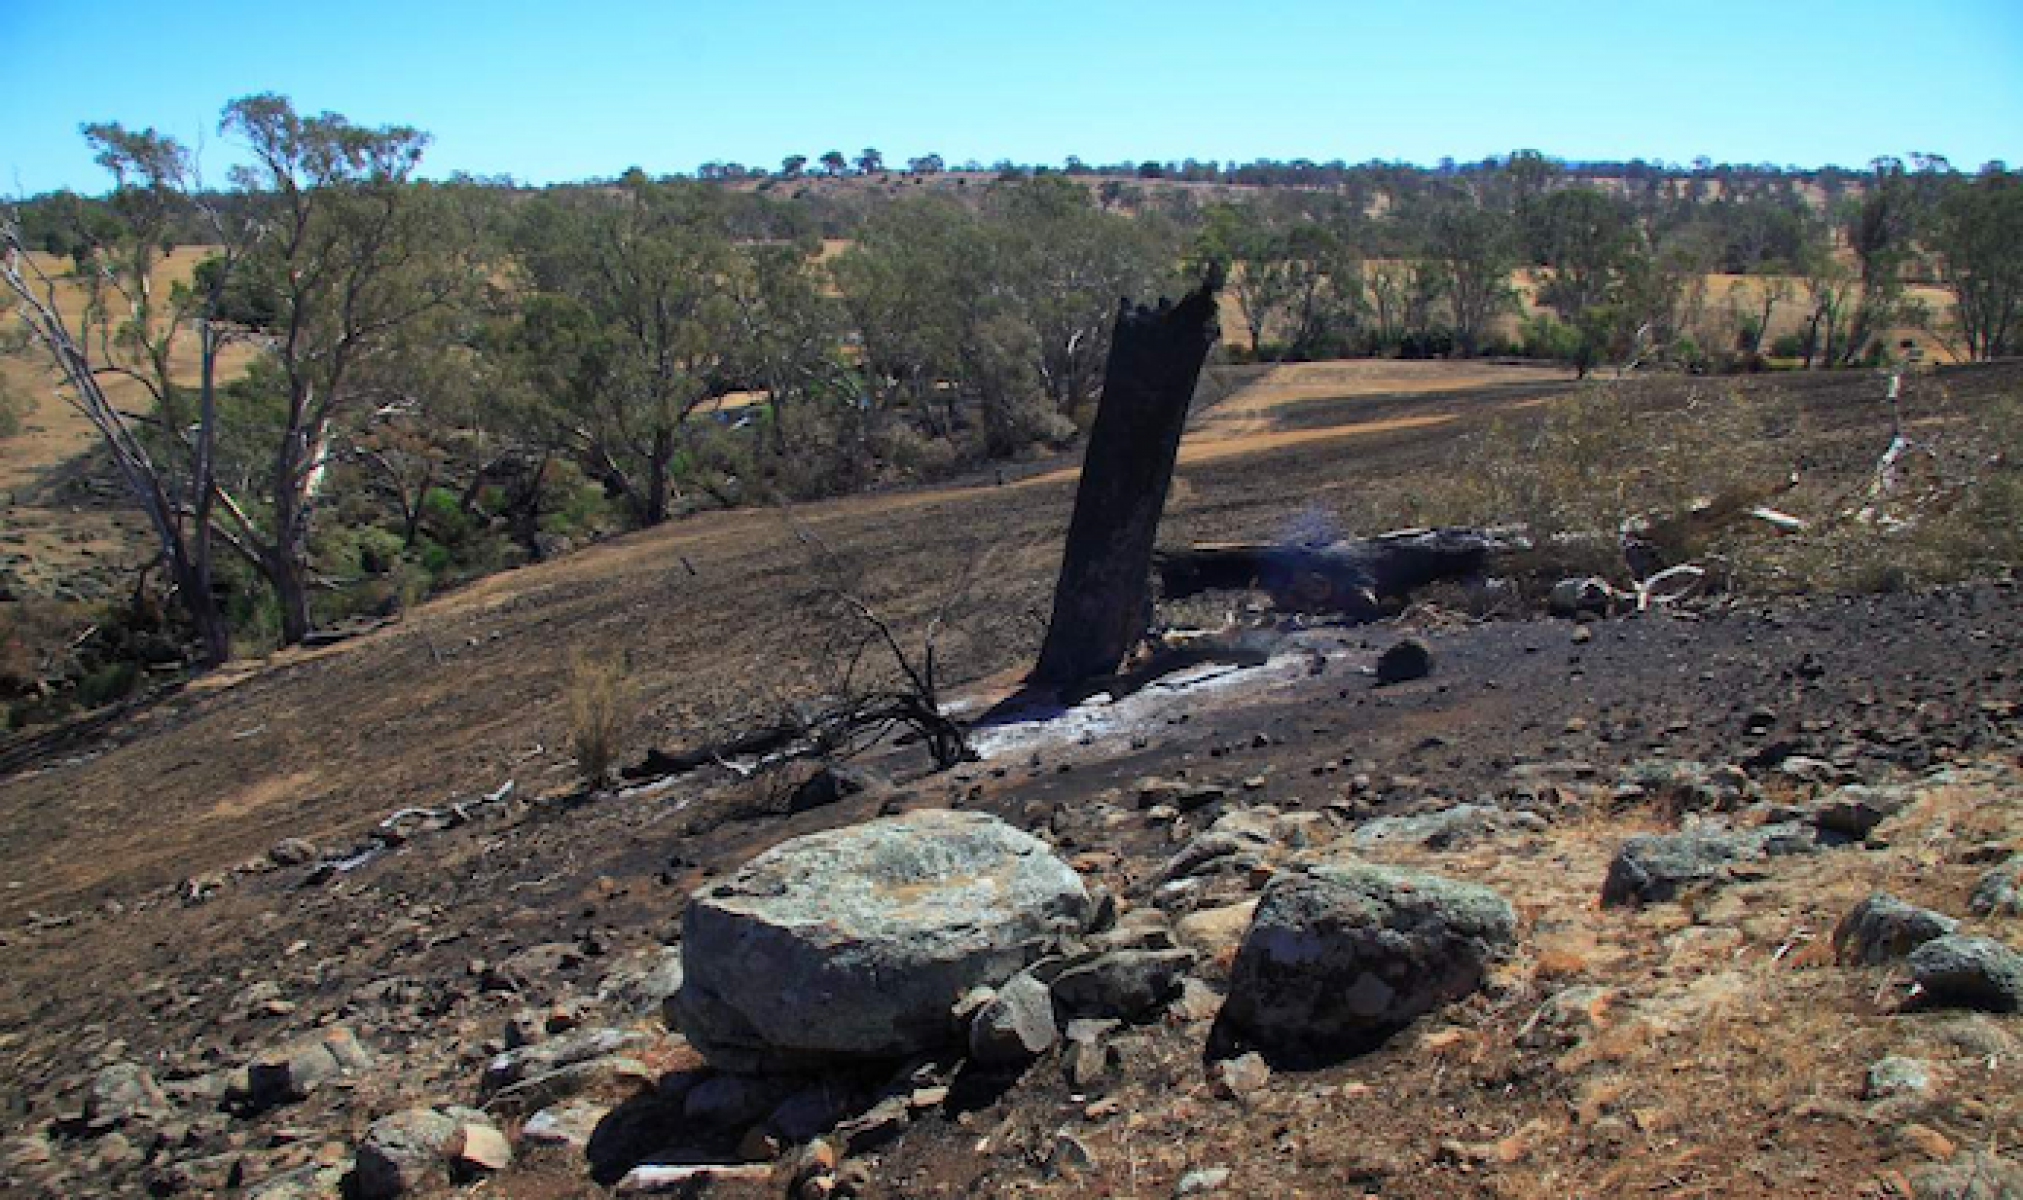 Fire-blackened tree stump and scorched pasture in foreground, intact riparian vegetation in background